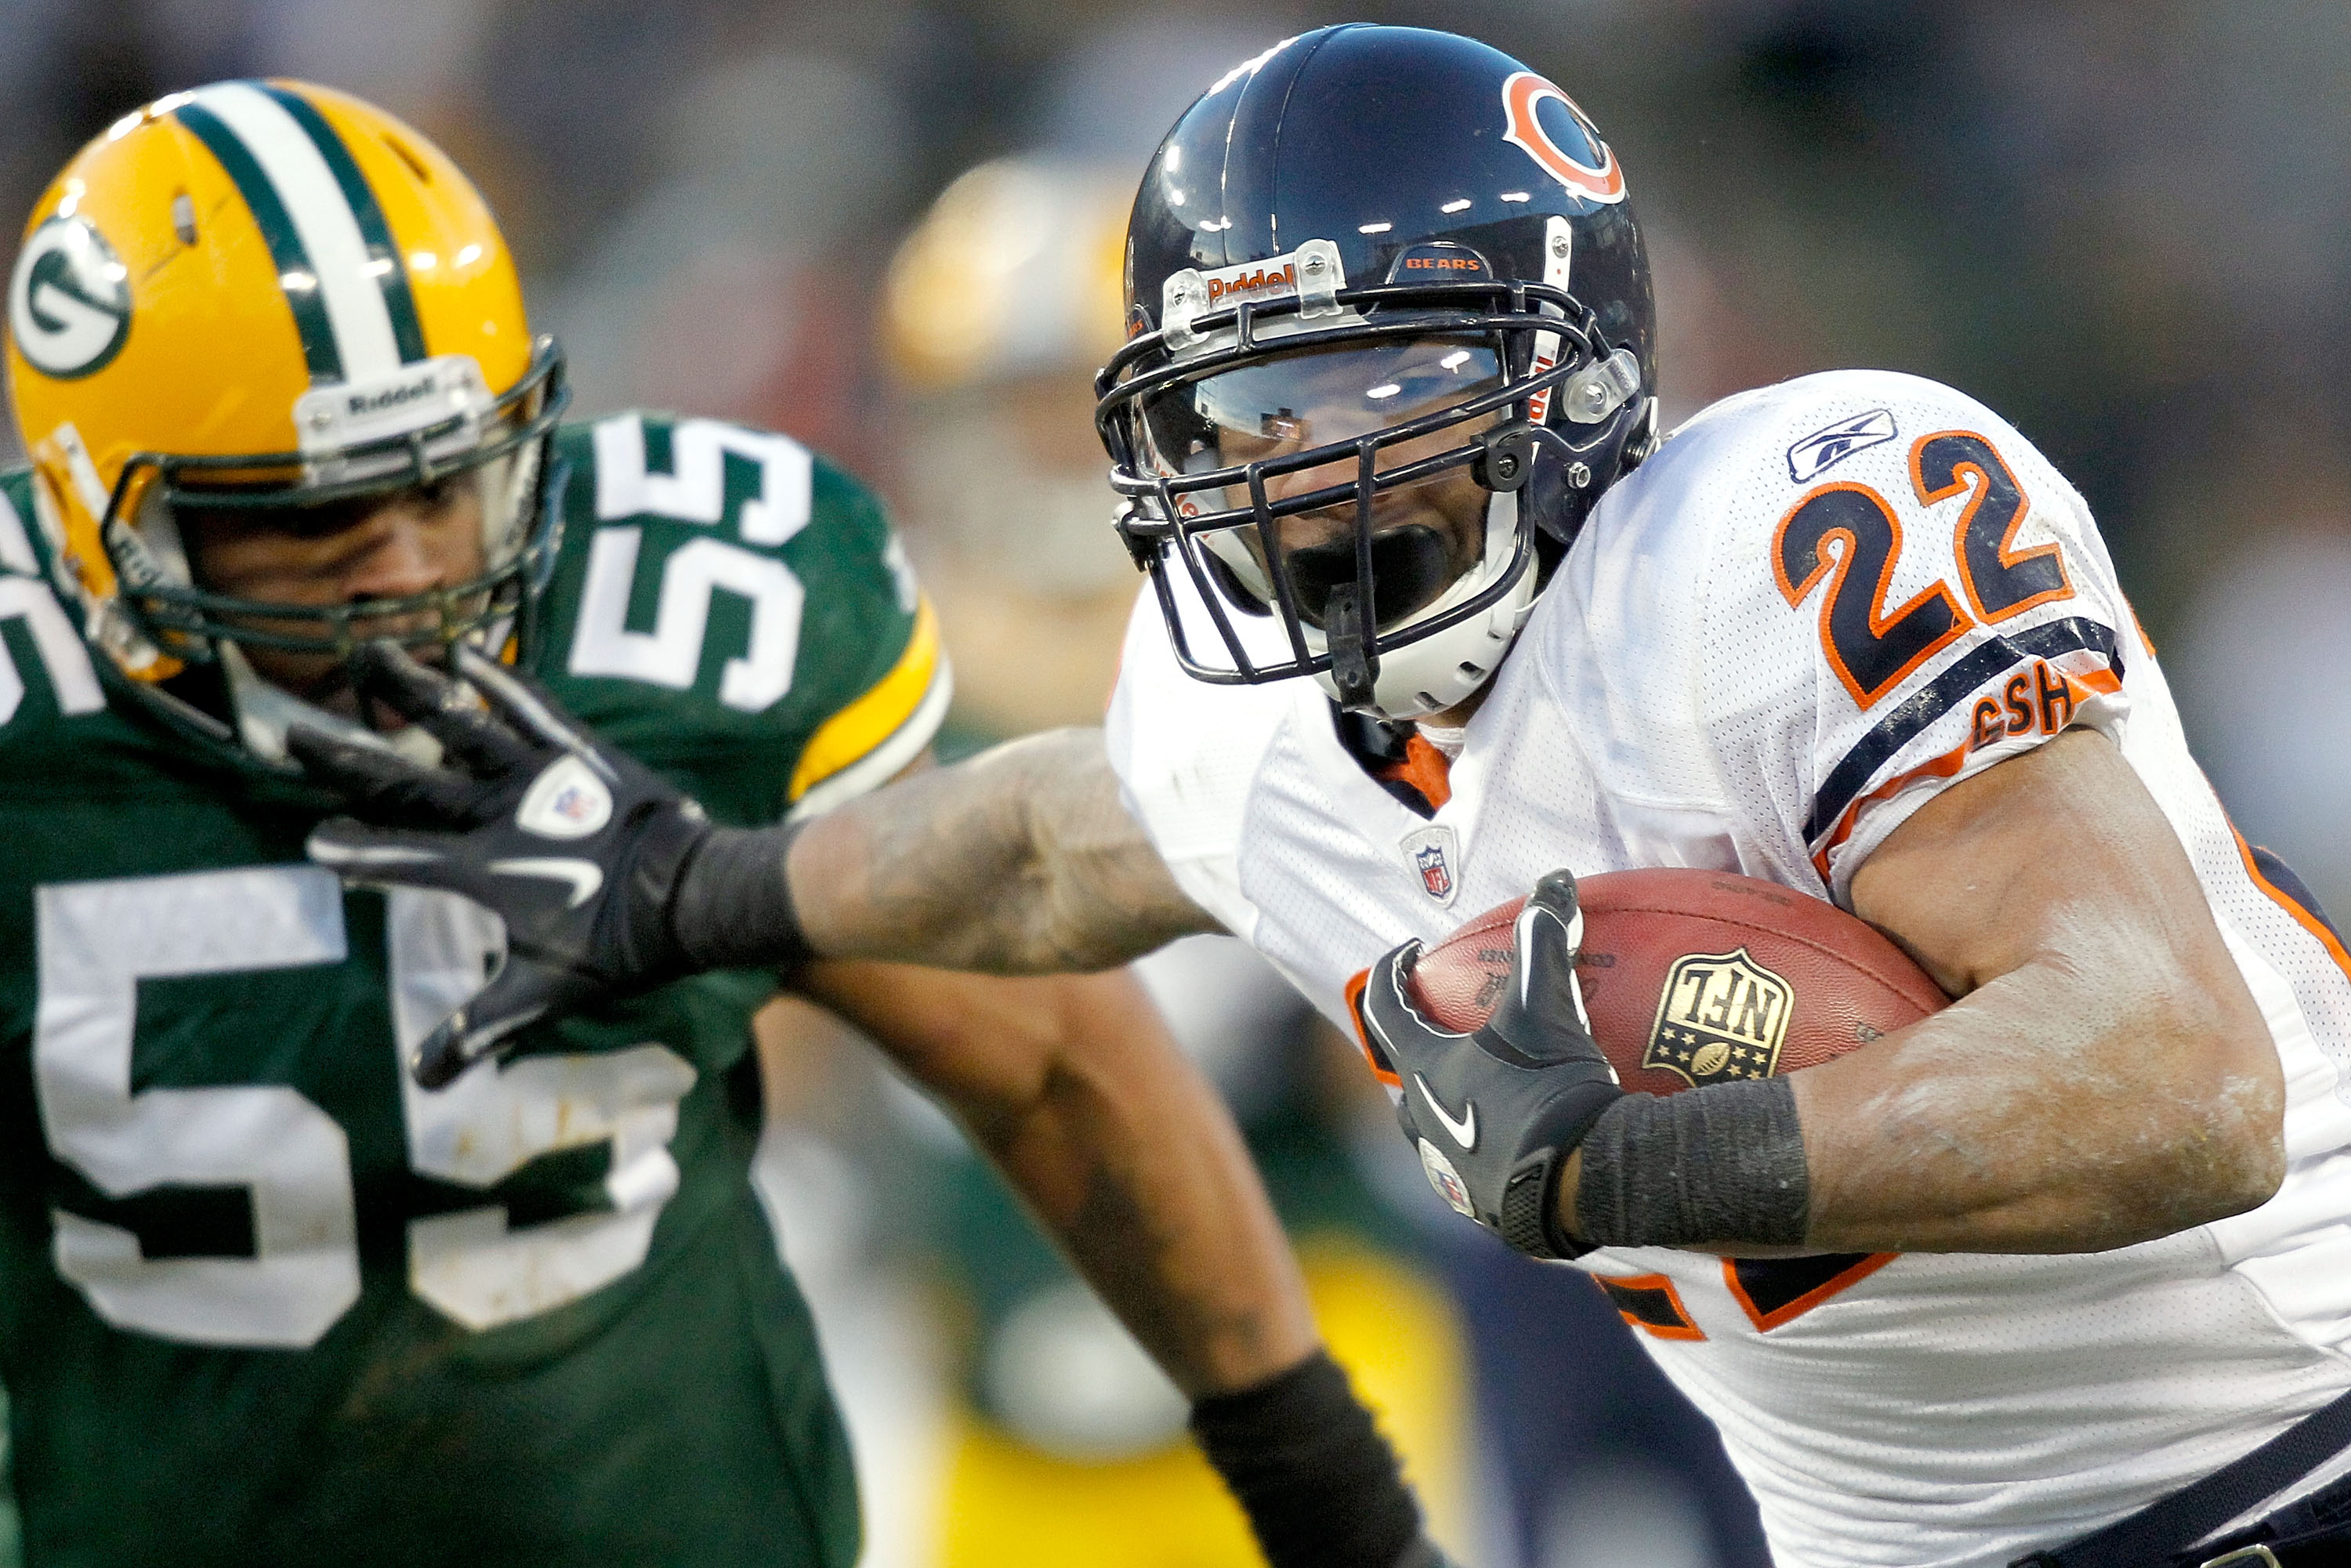 GREEN BAY, WI - JANUARY 02:  Matt Forte #22 of the Chicago Bears carries the ball after making a catch against the Green Bay Packers at Lambeau Field on January 2, 2011 in Green Bay, Wisconsin.  (Photo by Matthew Stockman/Getty Images)